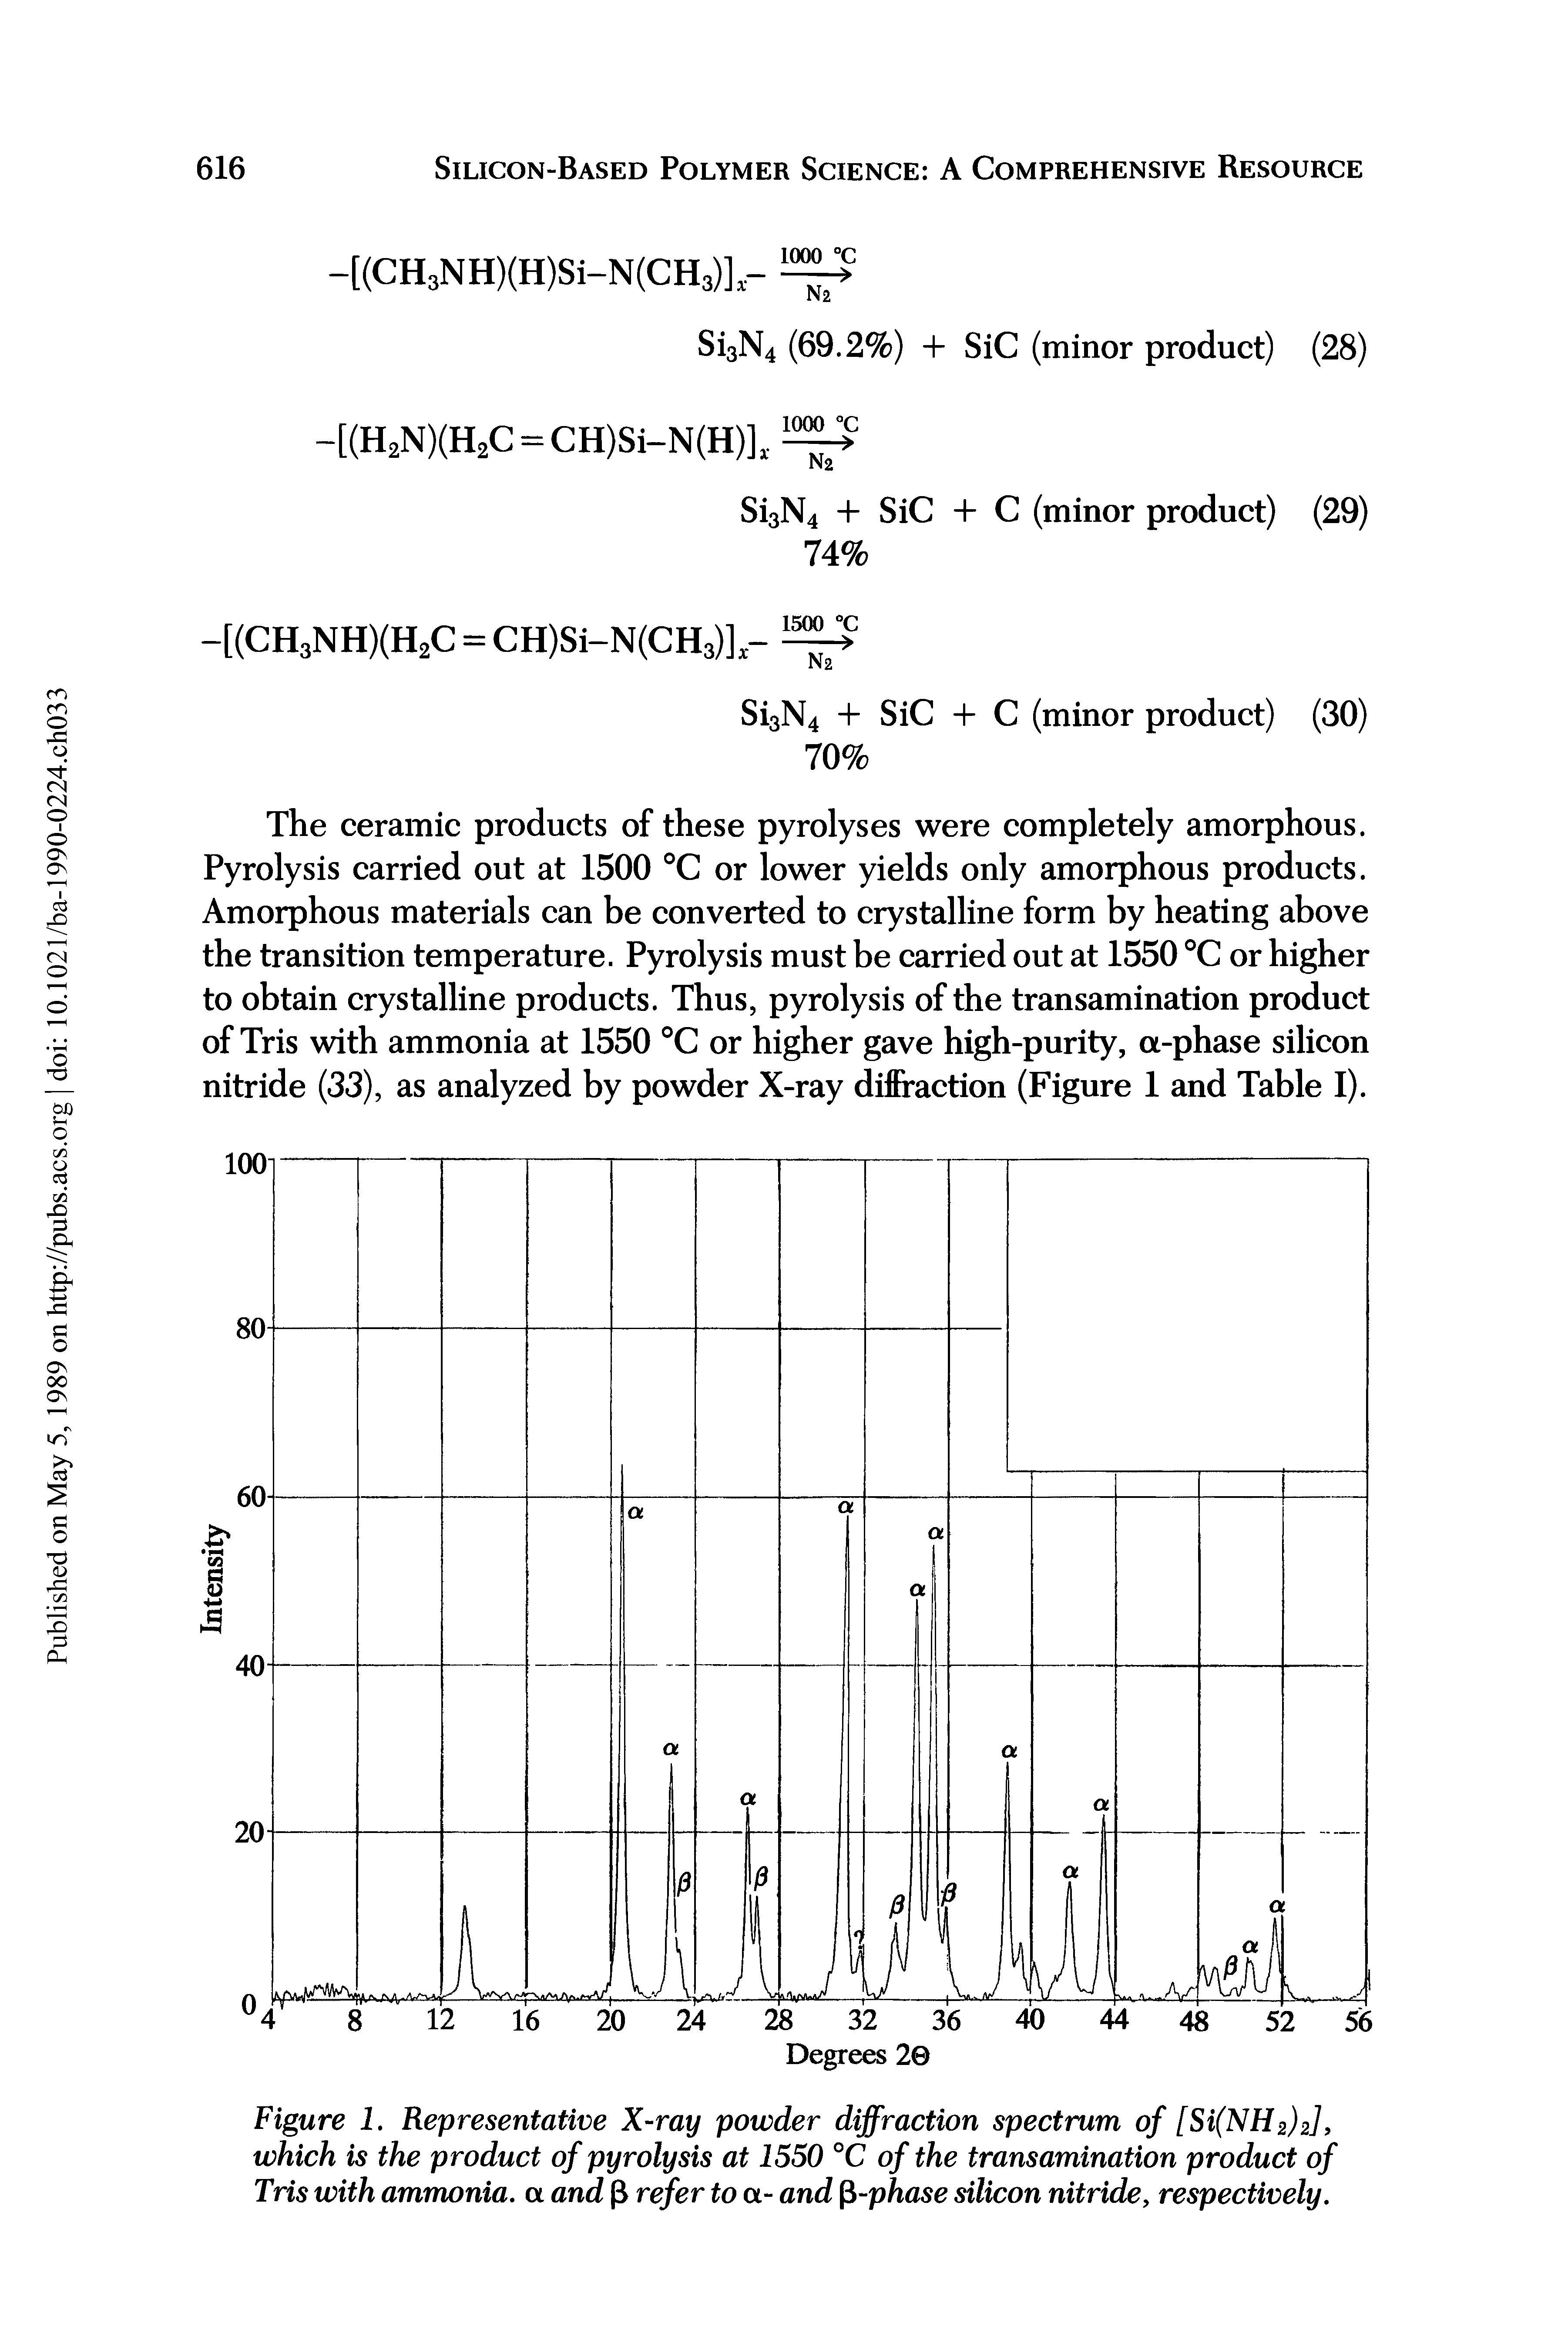 Figure 1. Representative X-ray powder diffraction spectrum of [Si(NH2)2]> which is the product of pyrolysis at 1550 °C of the transamination product of Tris with ammonia, a and P refer to a- and -phase silicon nitride, respectively.